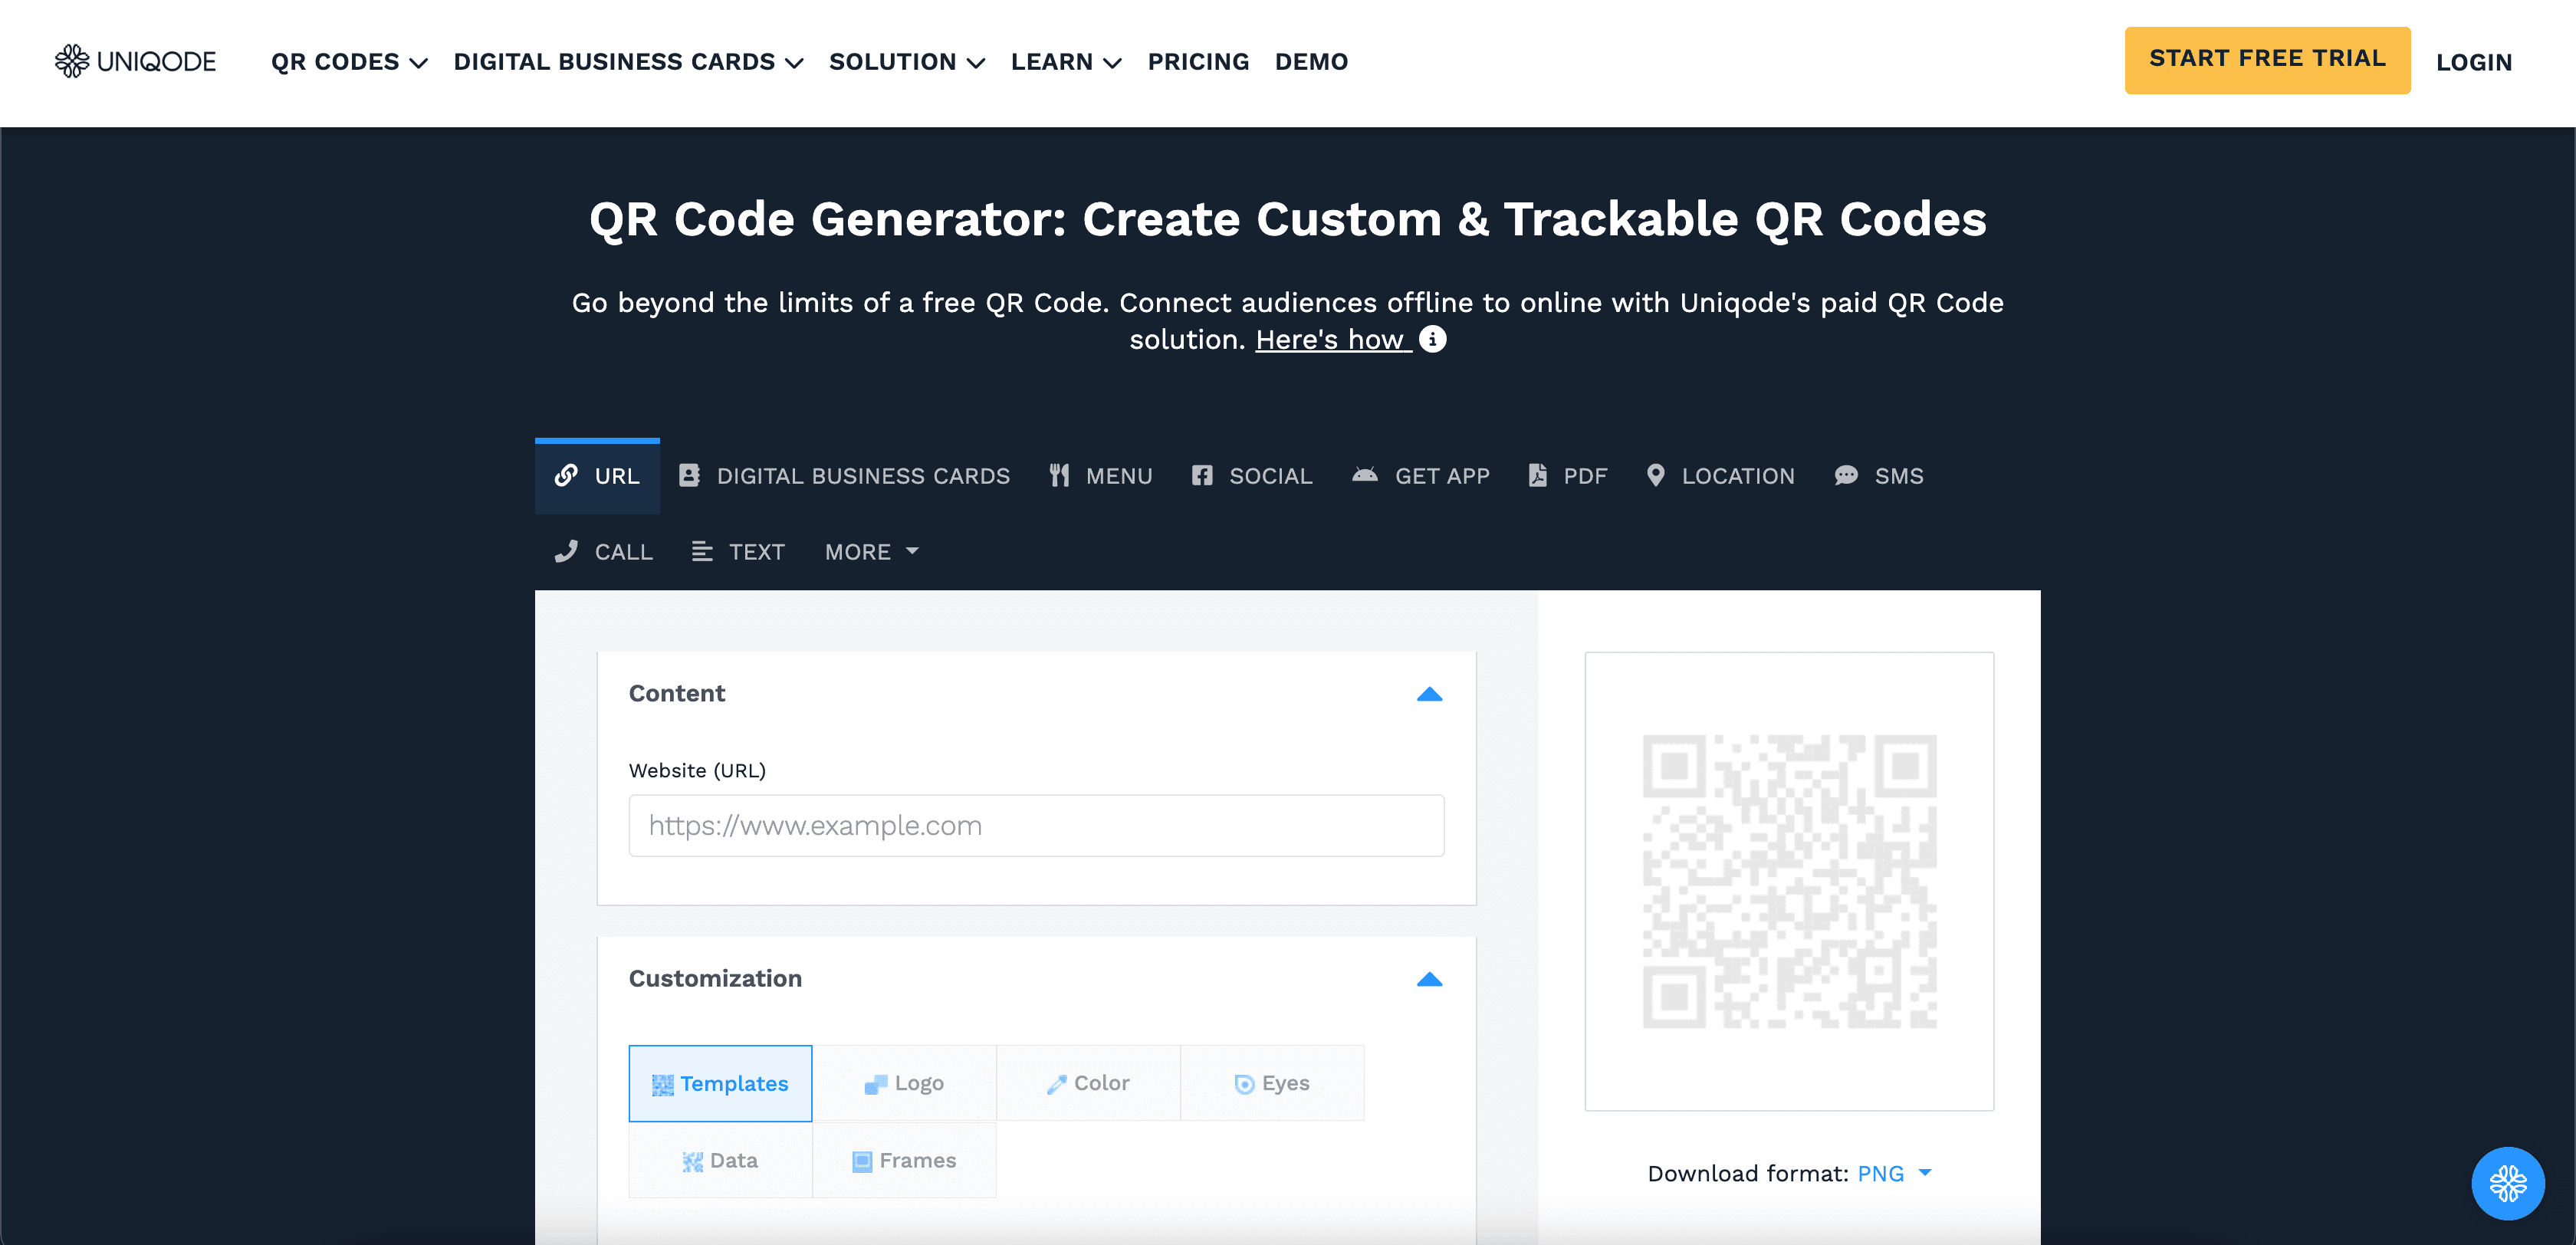 QR Code Generator 14-day free trial sales funnel